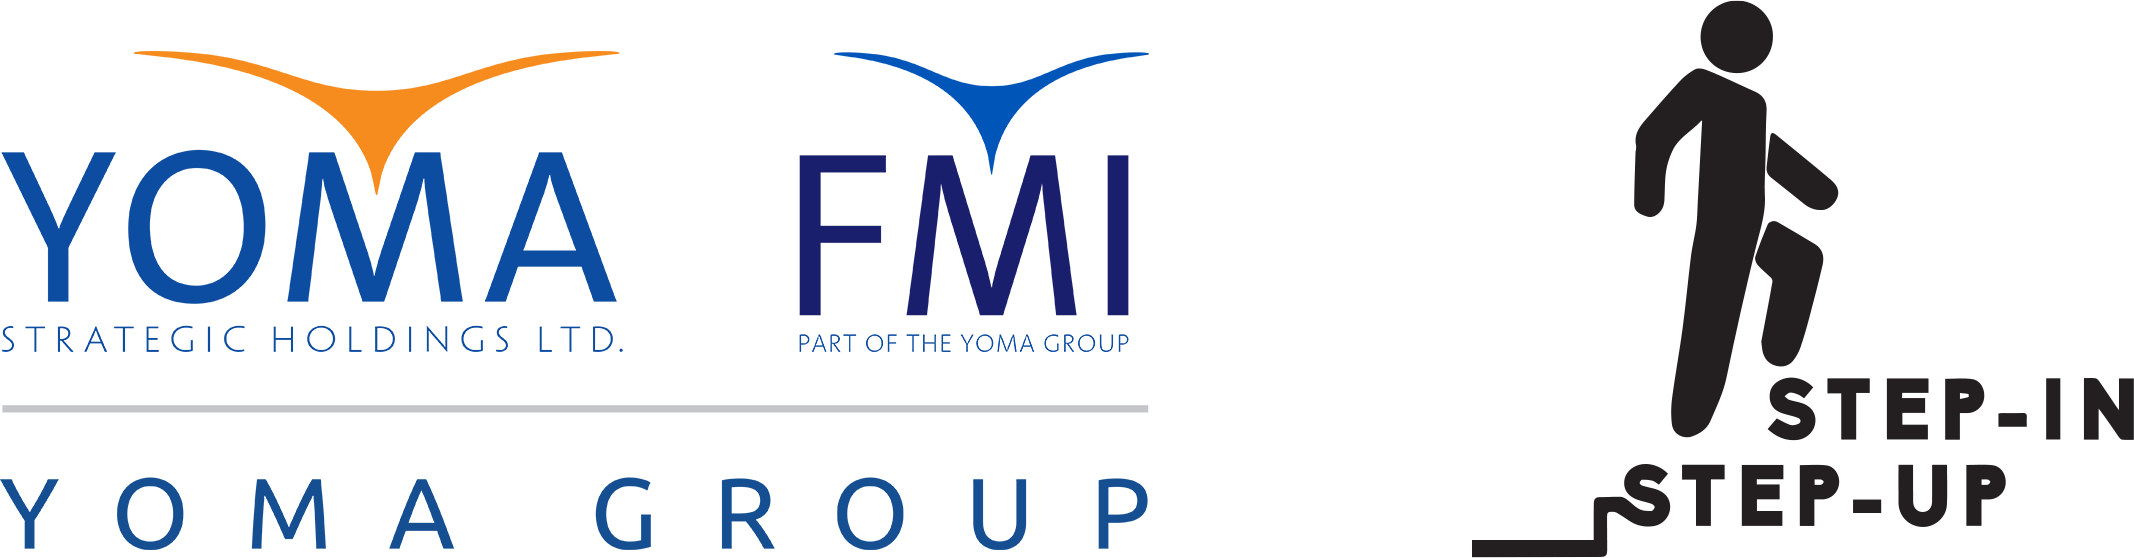 Yoma Group & Step In Step Up